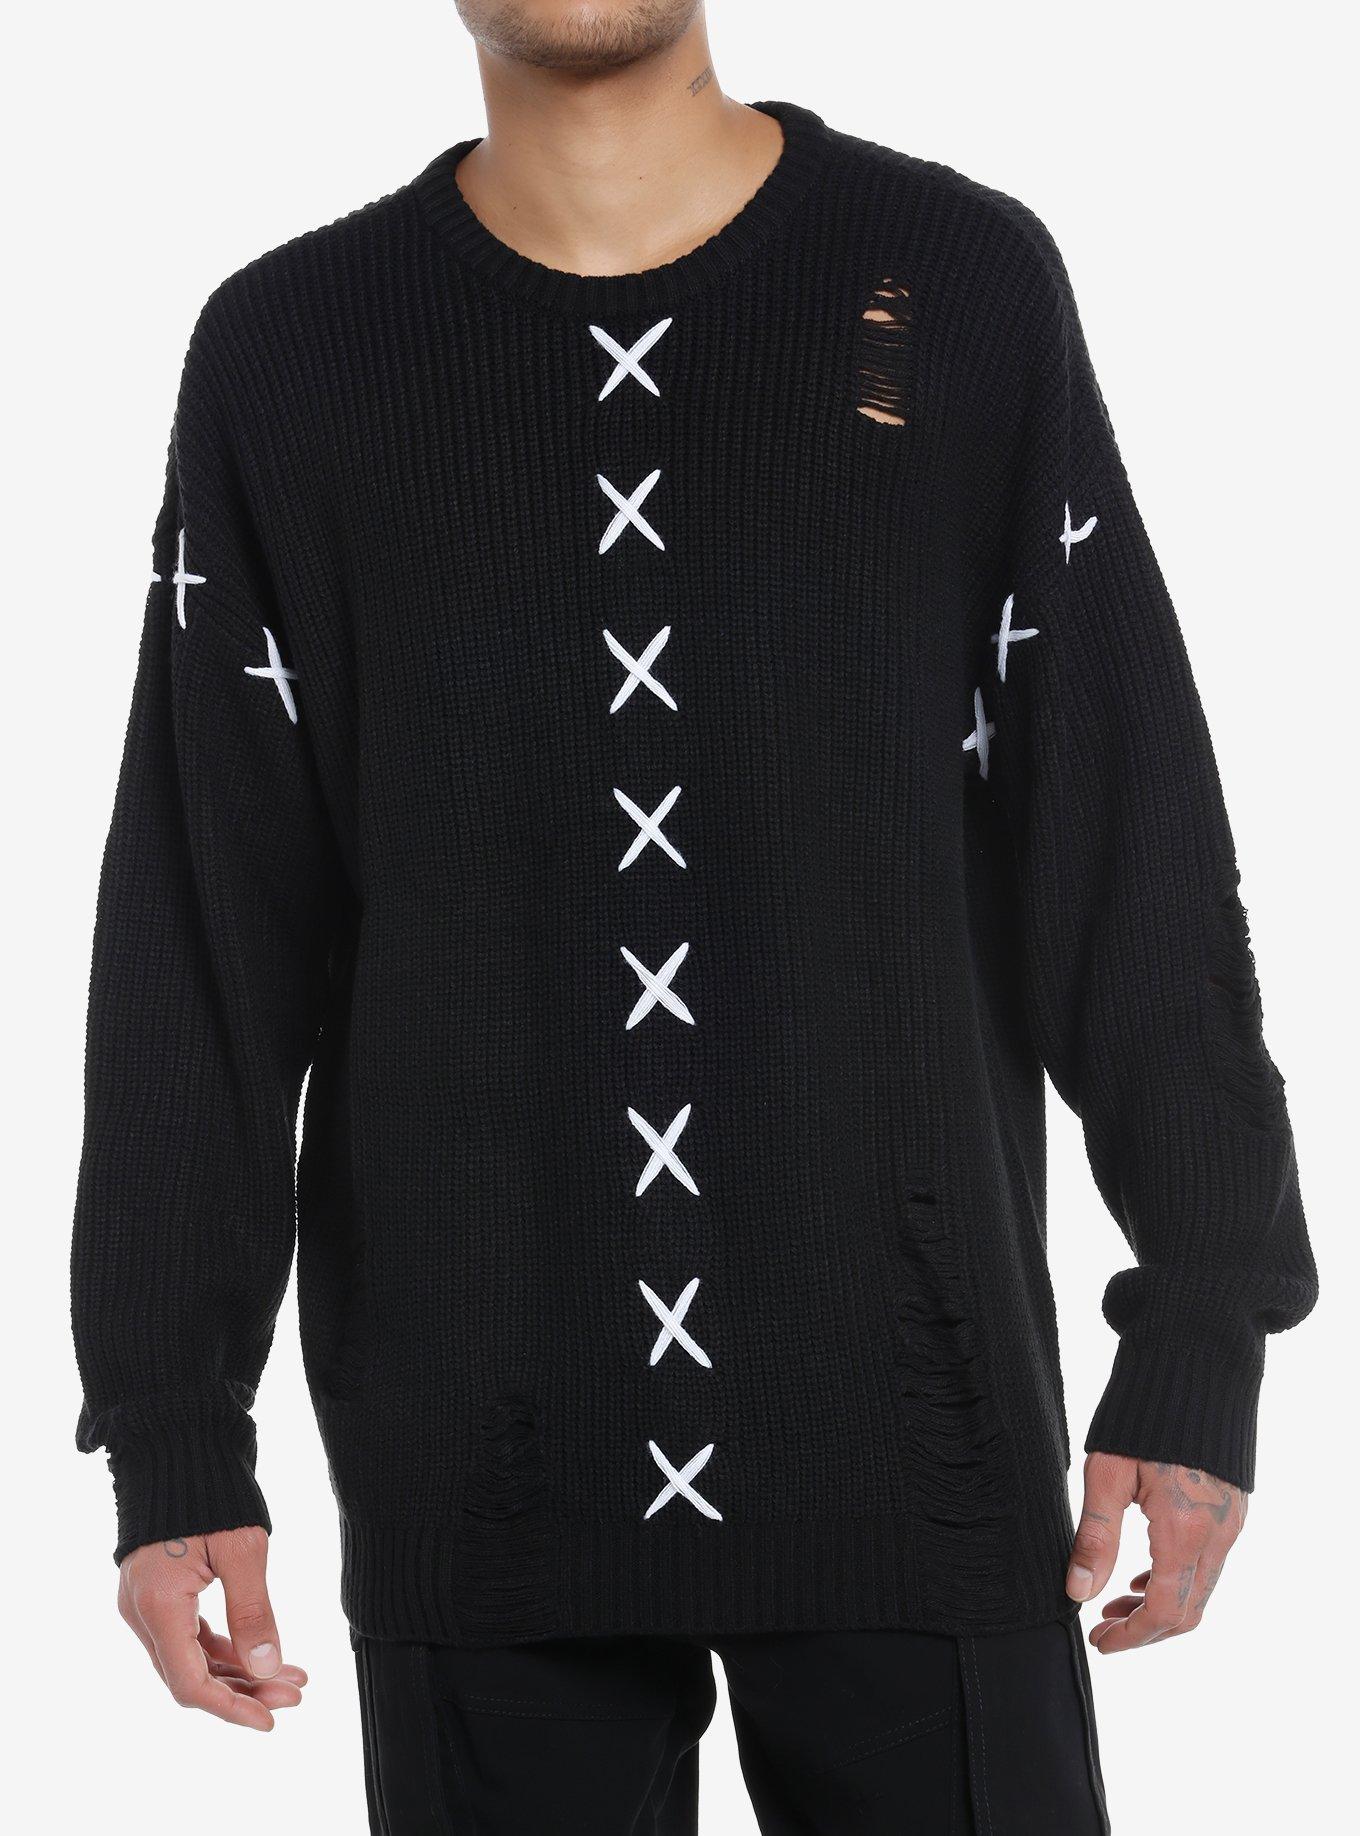 Louis Vuitton Louis 4 Vuitton Knitted Pullover Ink. Size S0